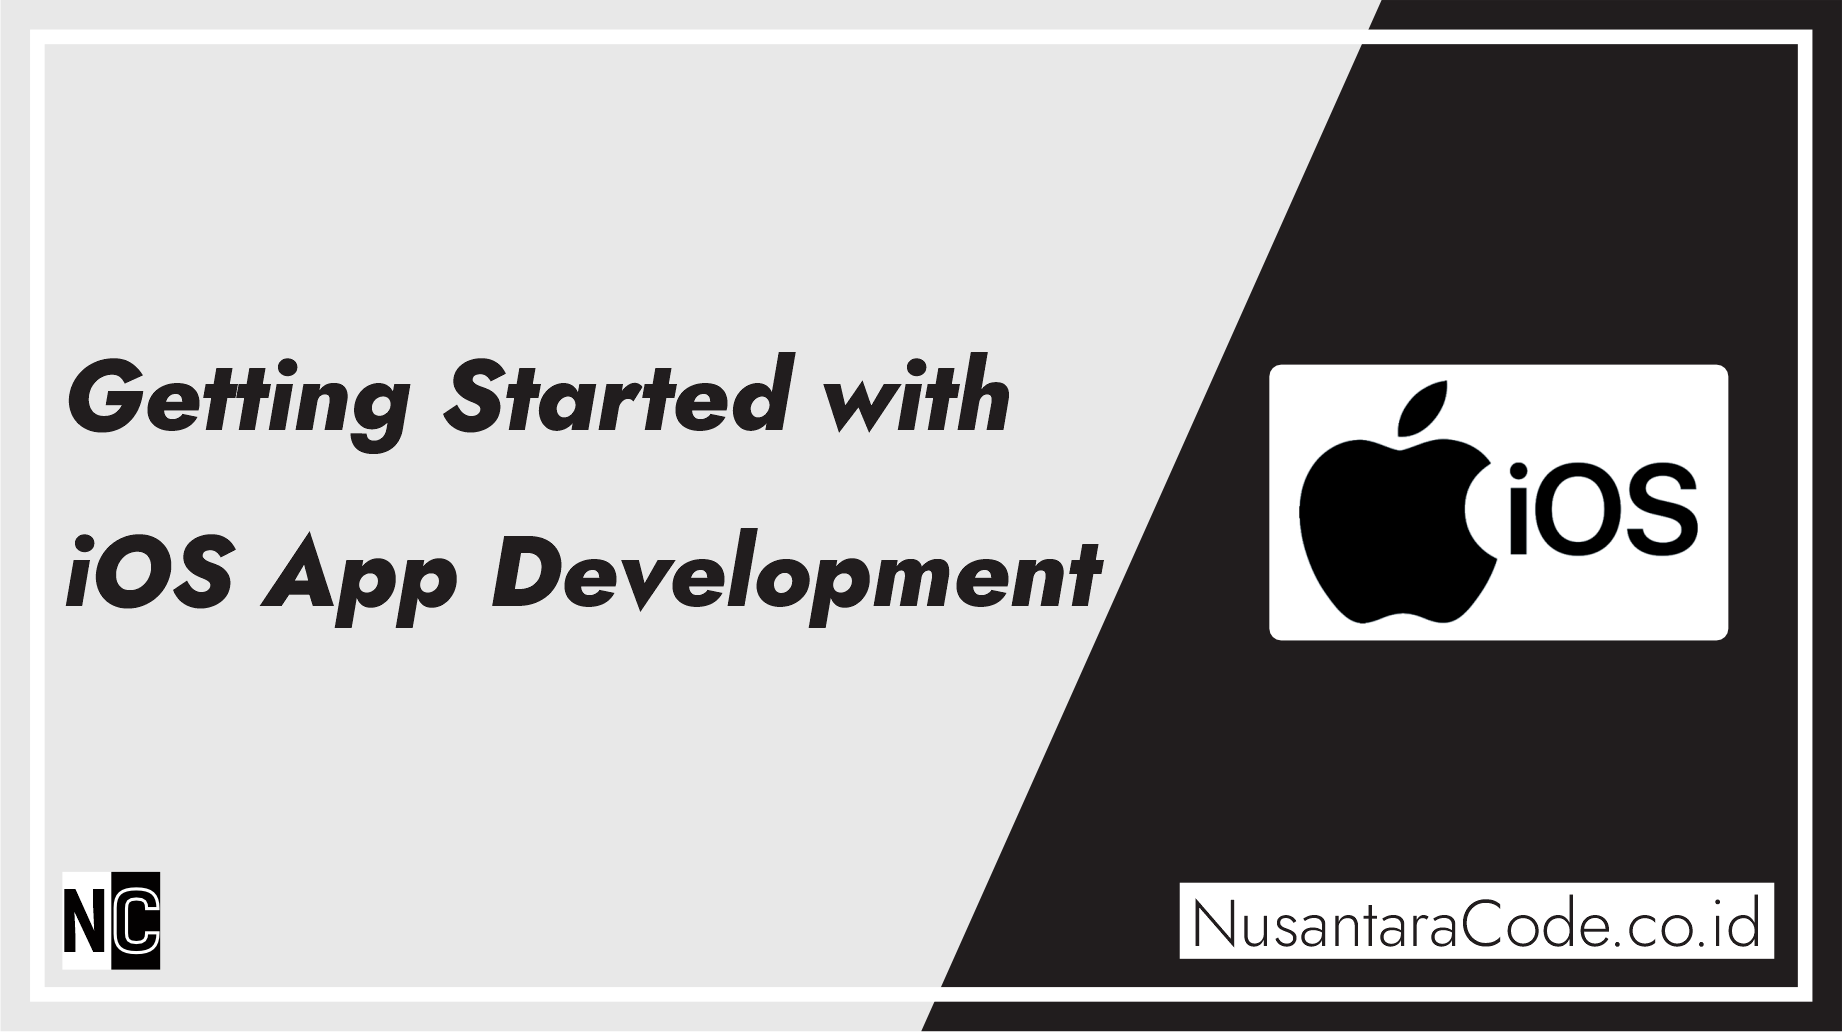 Getting Started with iOS App Development